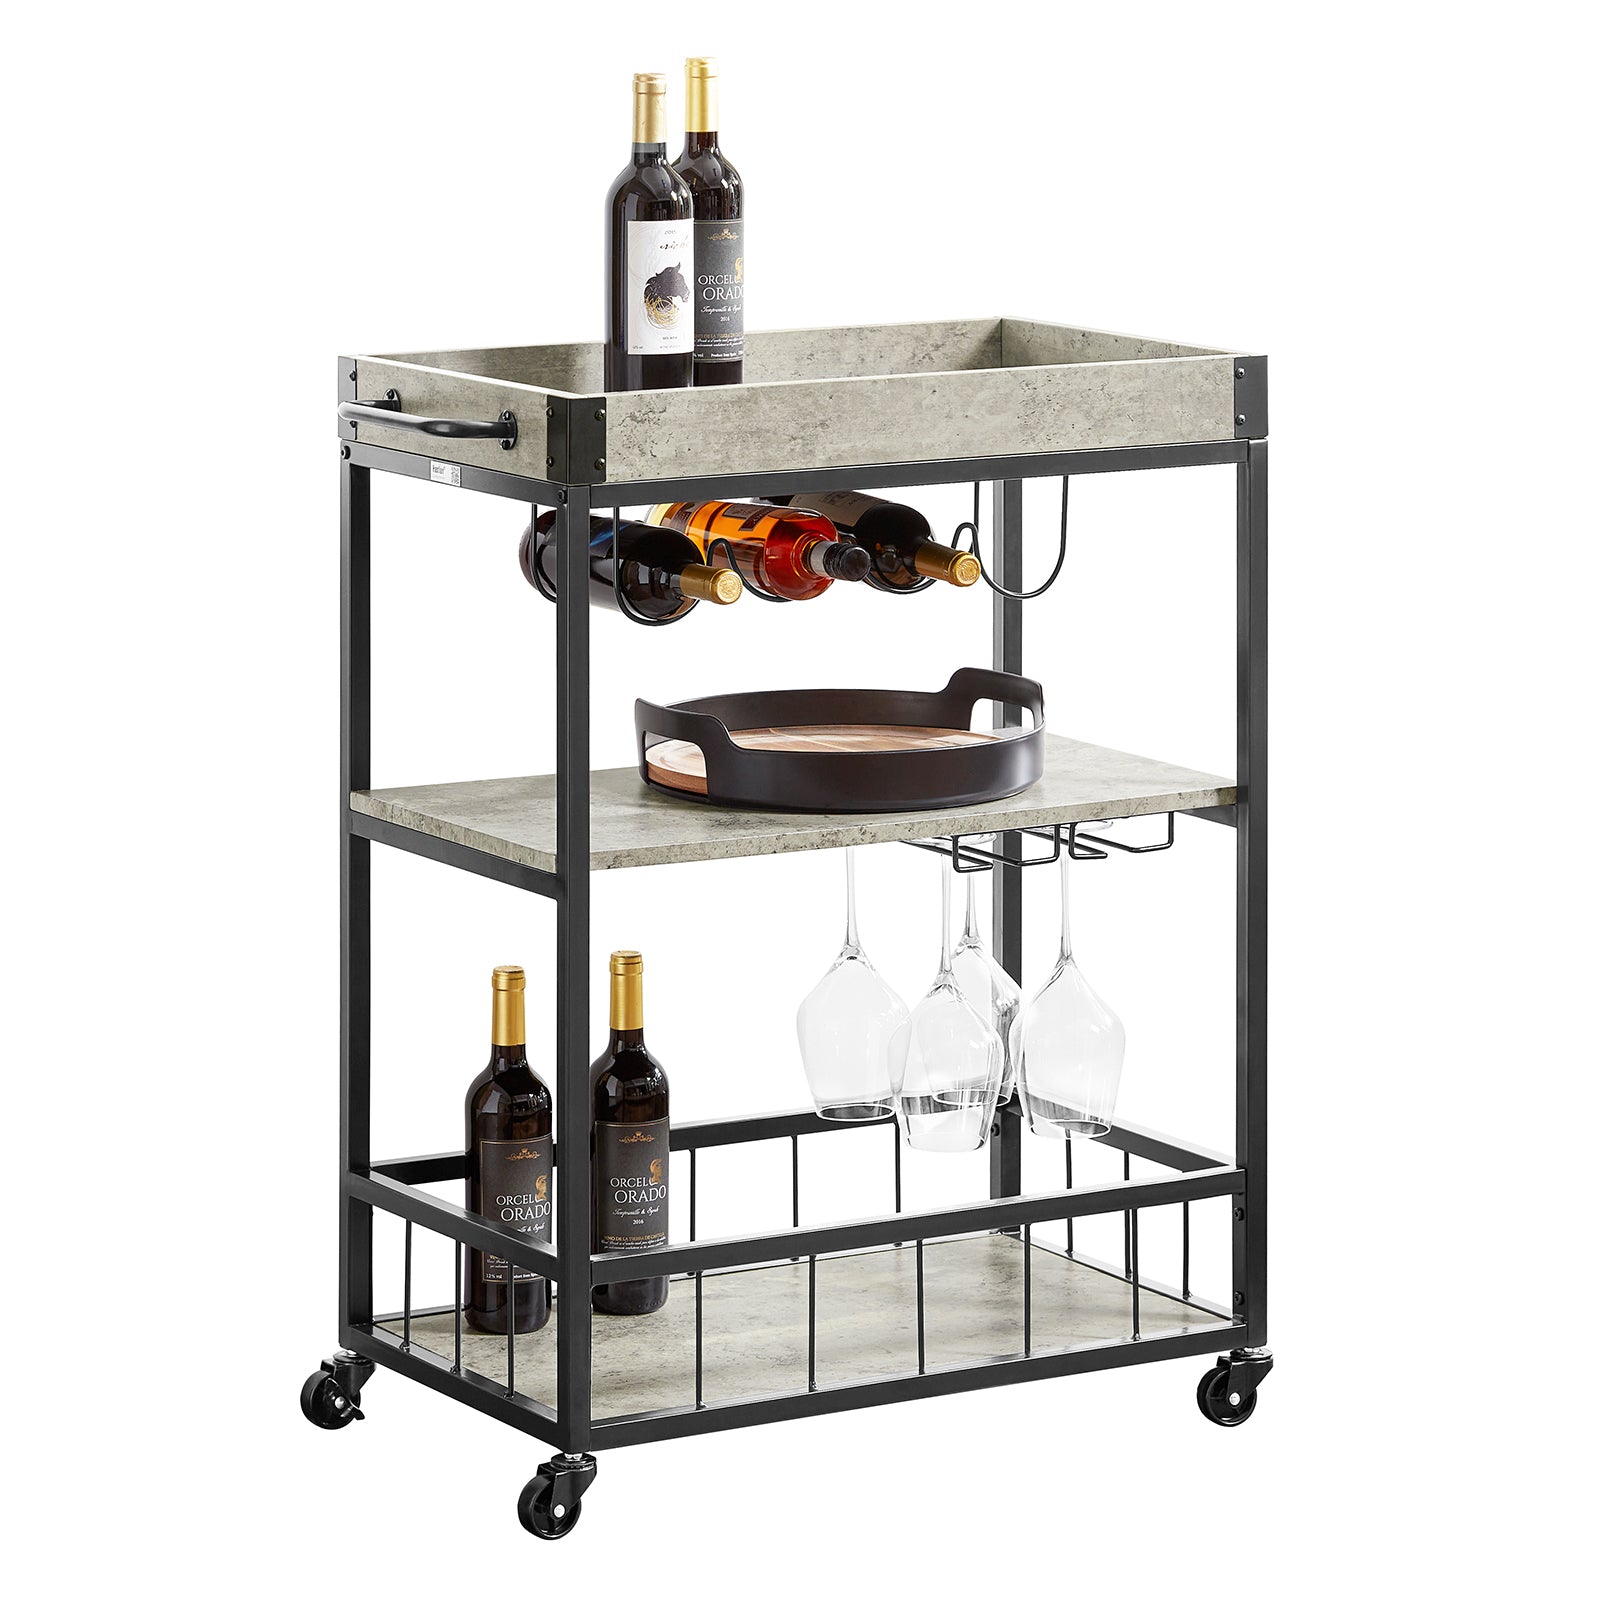 TEO, new professional kitchen/horeca trolley with 3 adjustable shelves